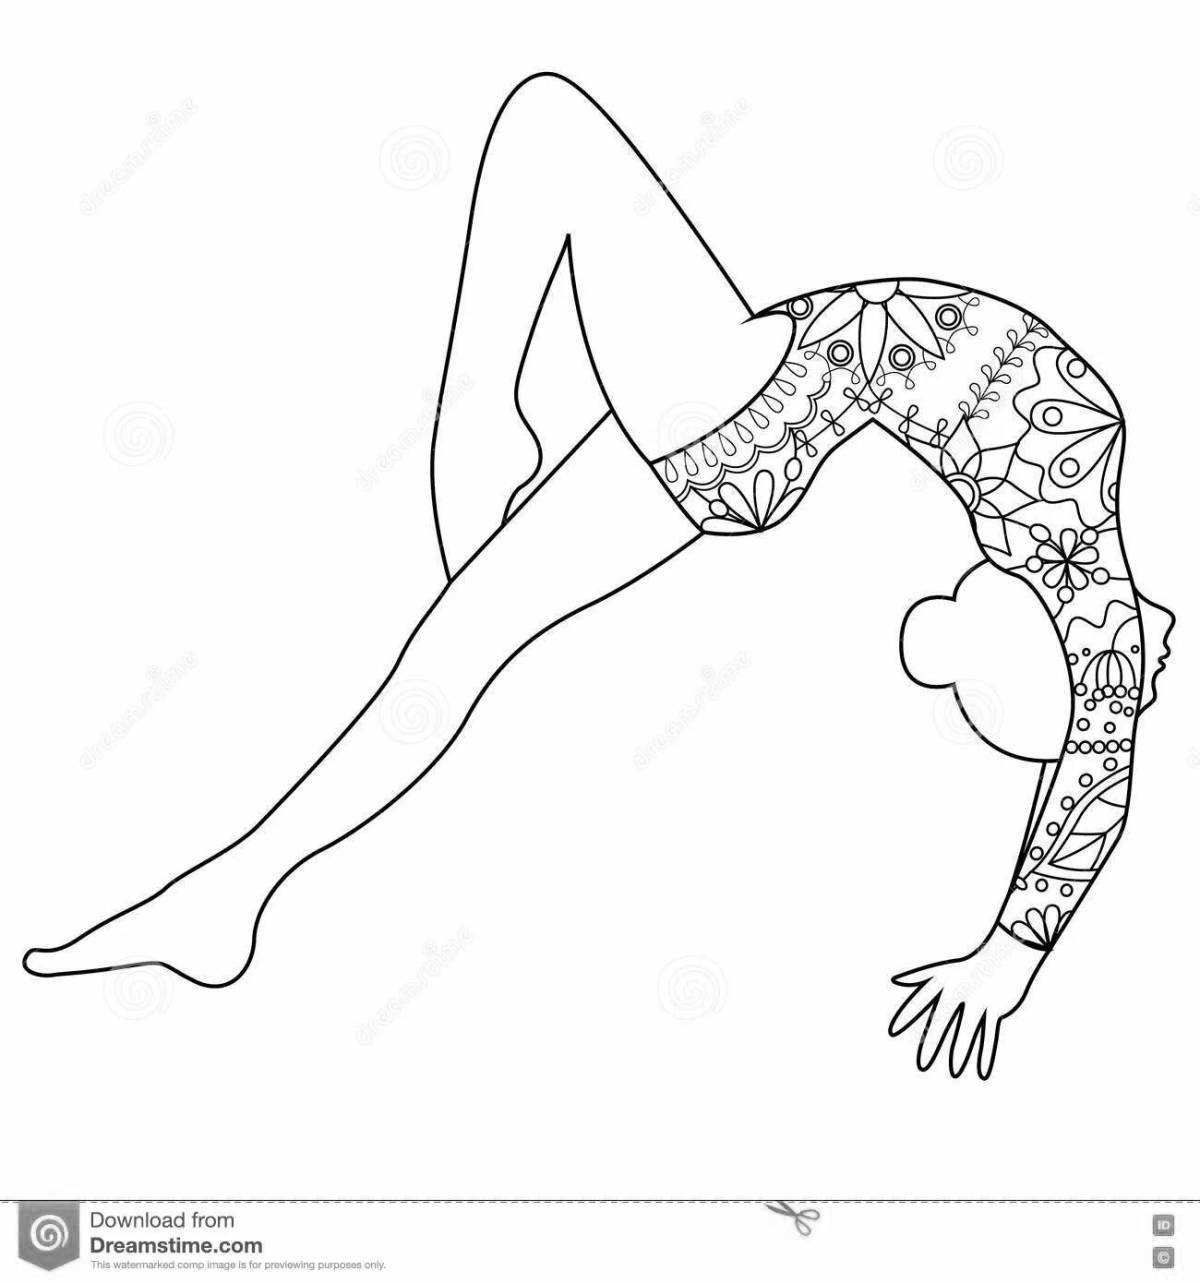 Amazing gymnastics coloring book for girls